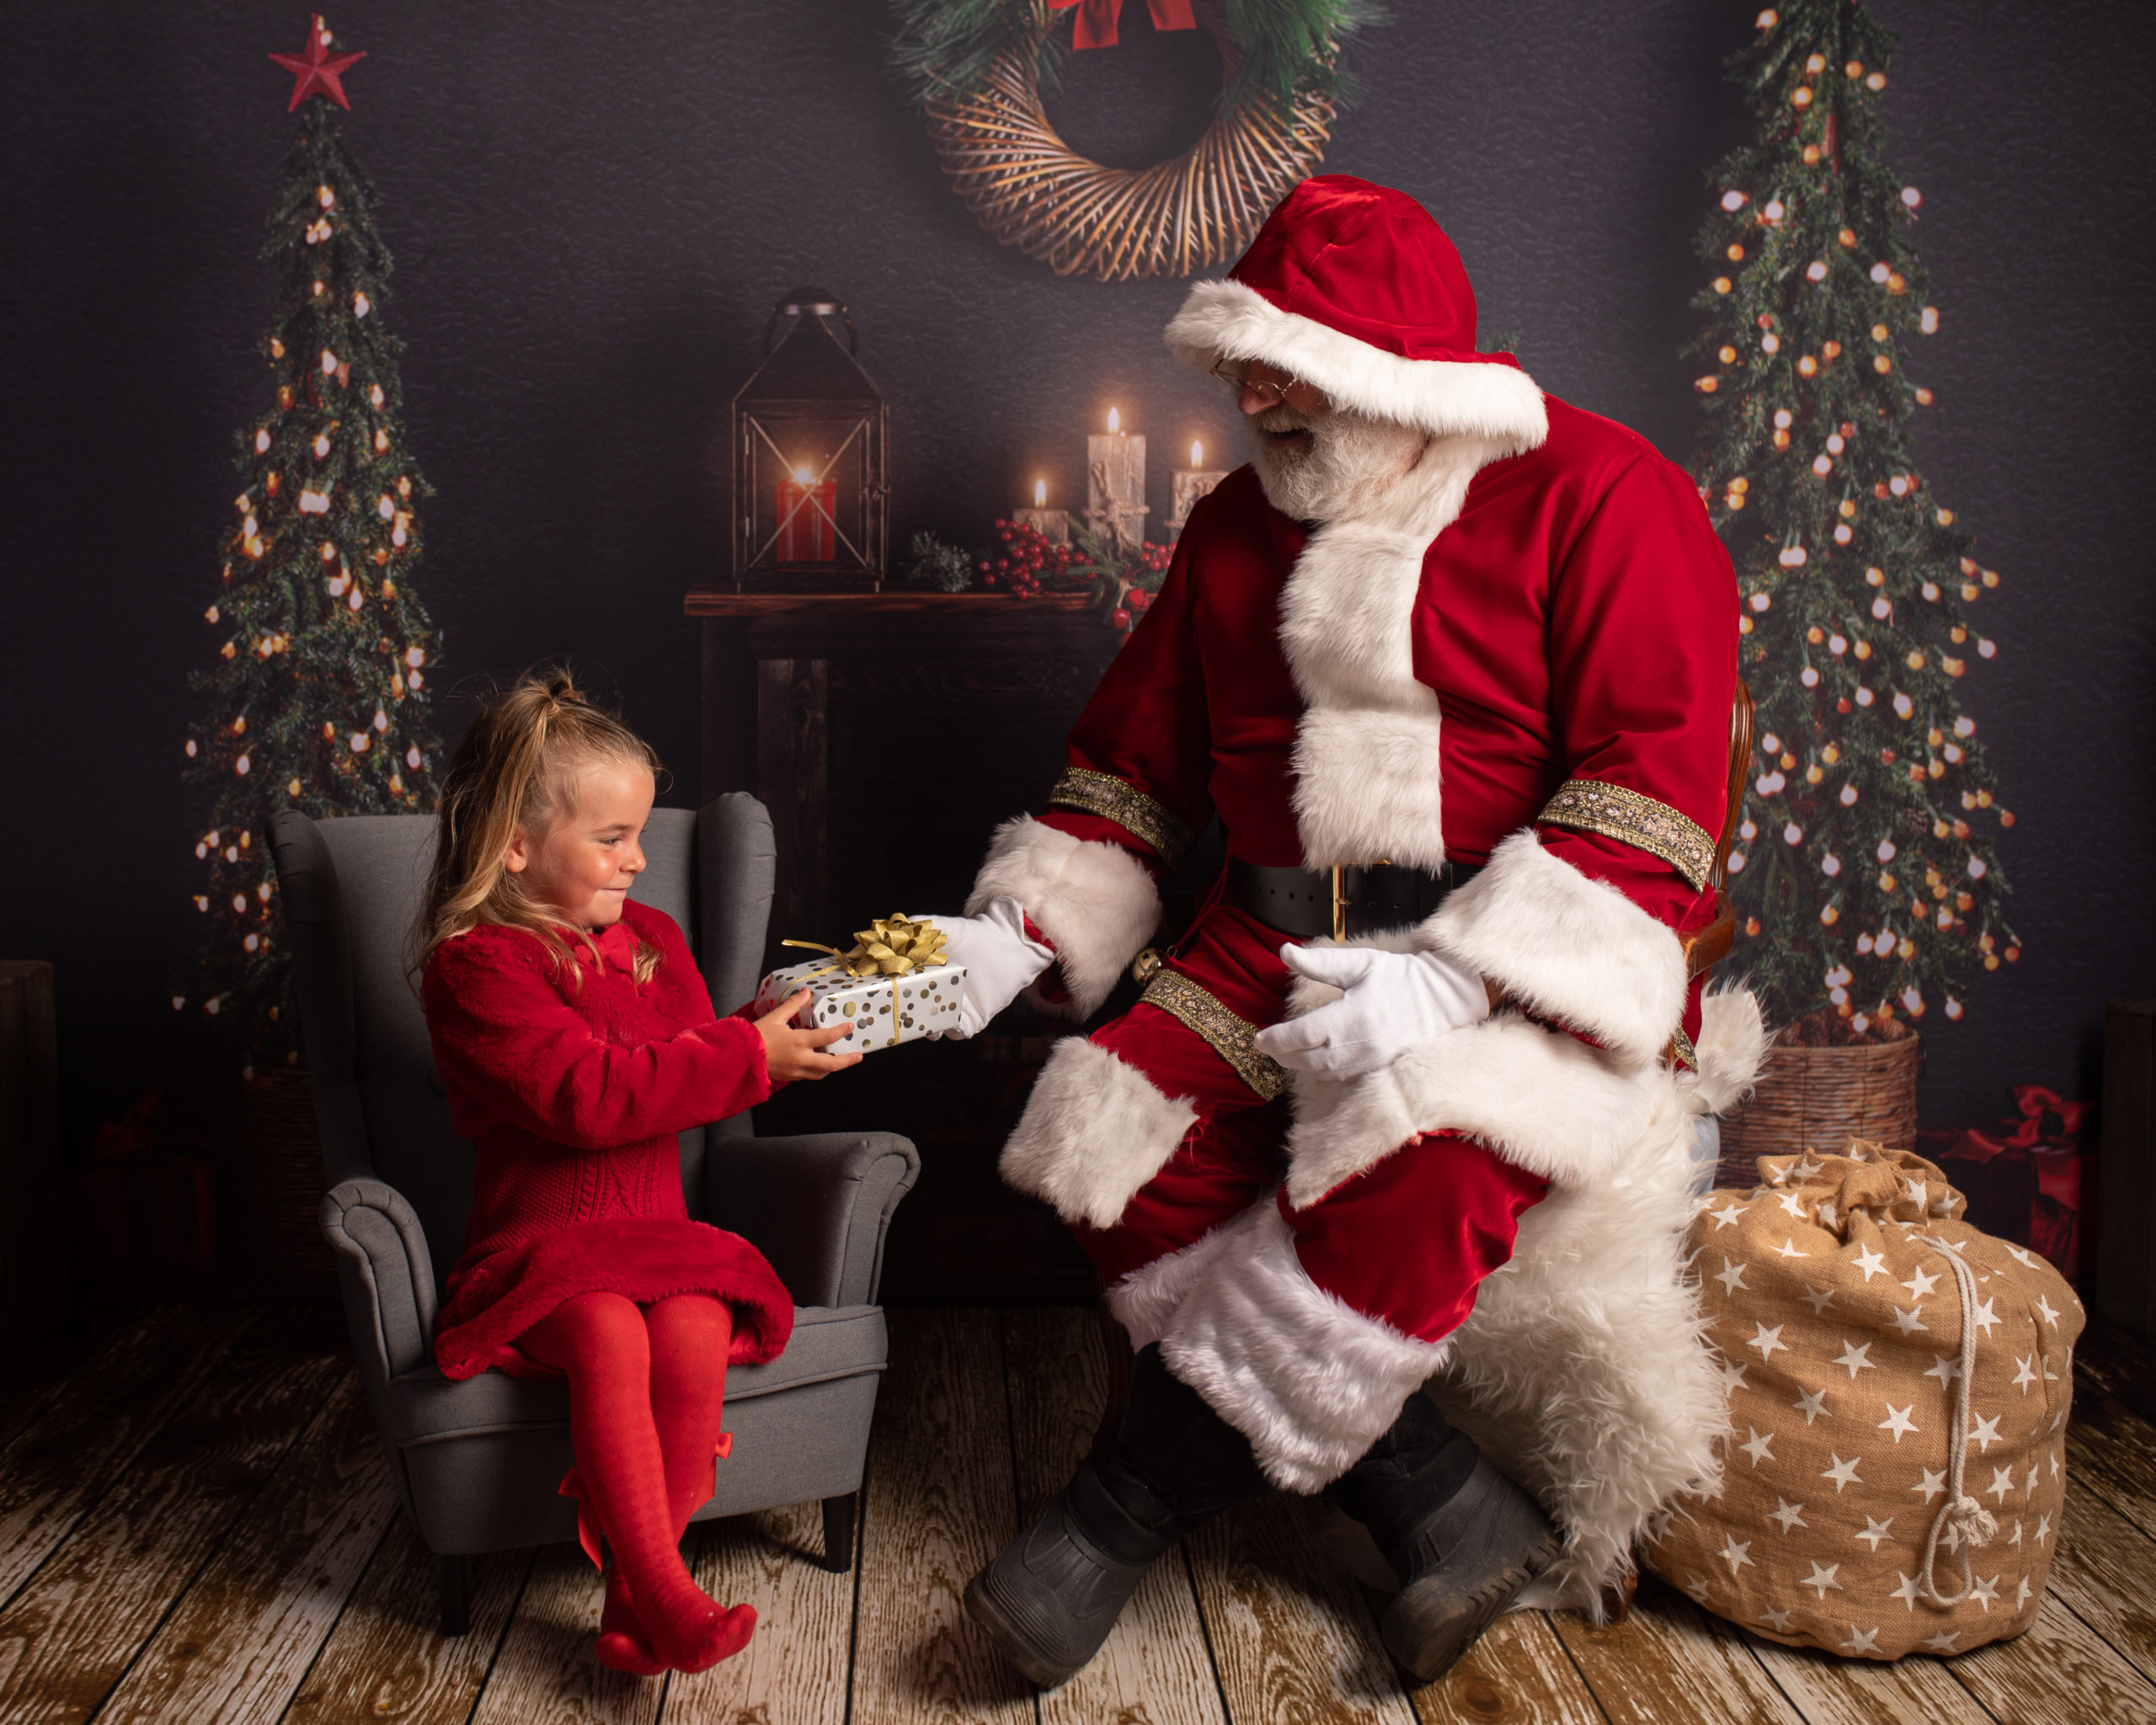 Santa handing little girl a present in front of fireplace and Christmas trees. Photographed by Kent Family Photographer